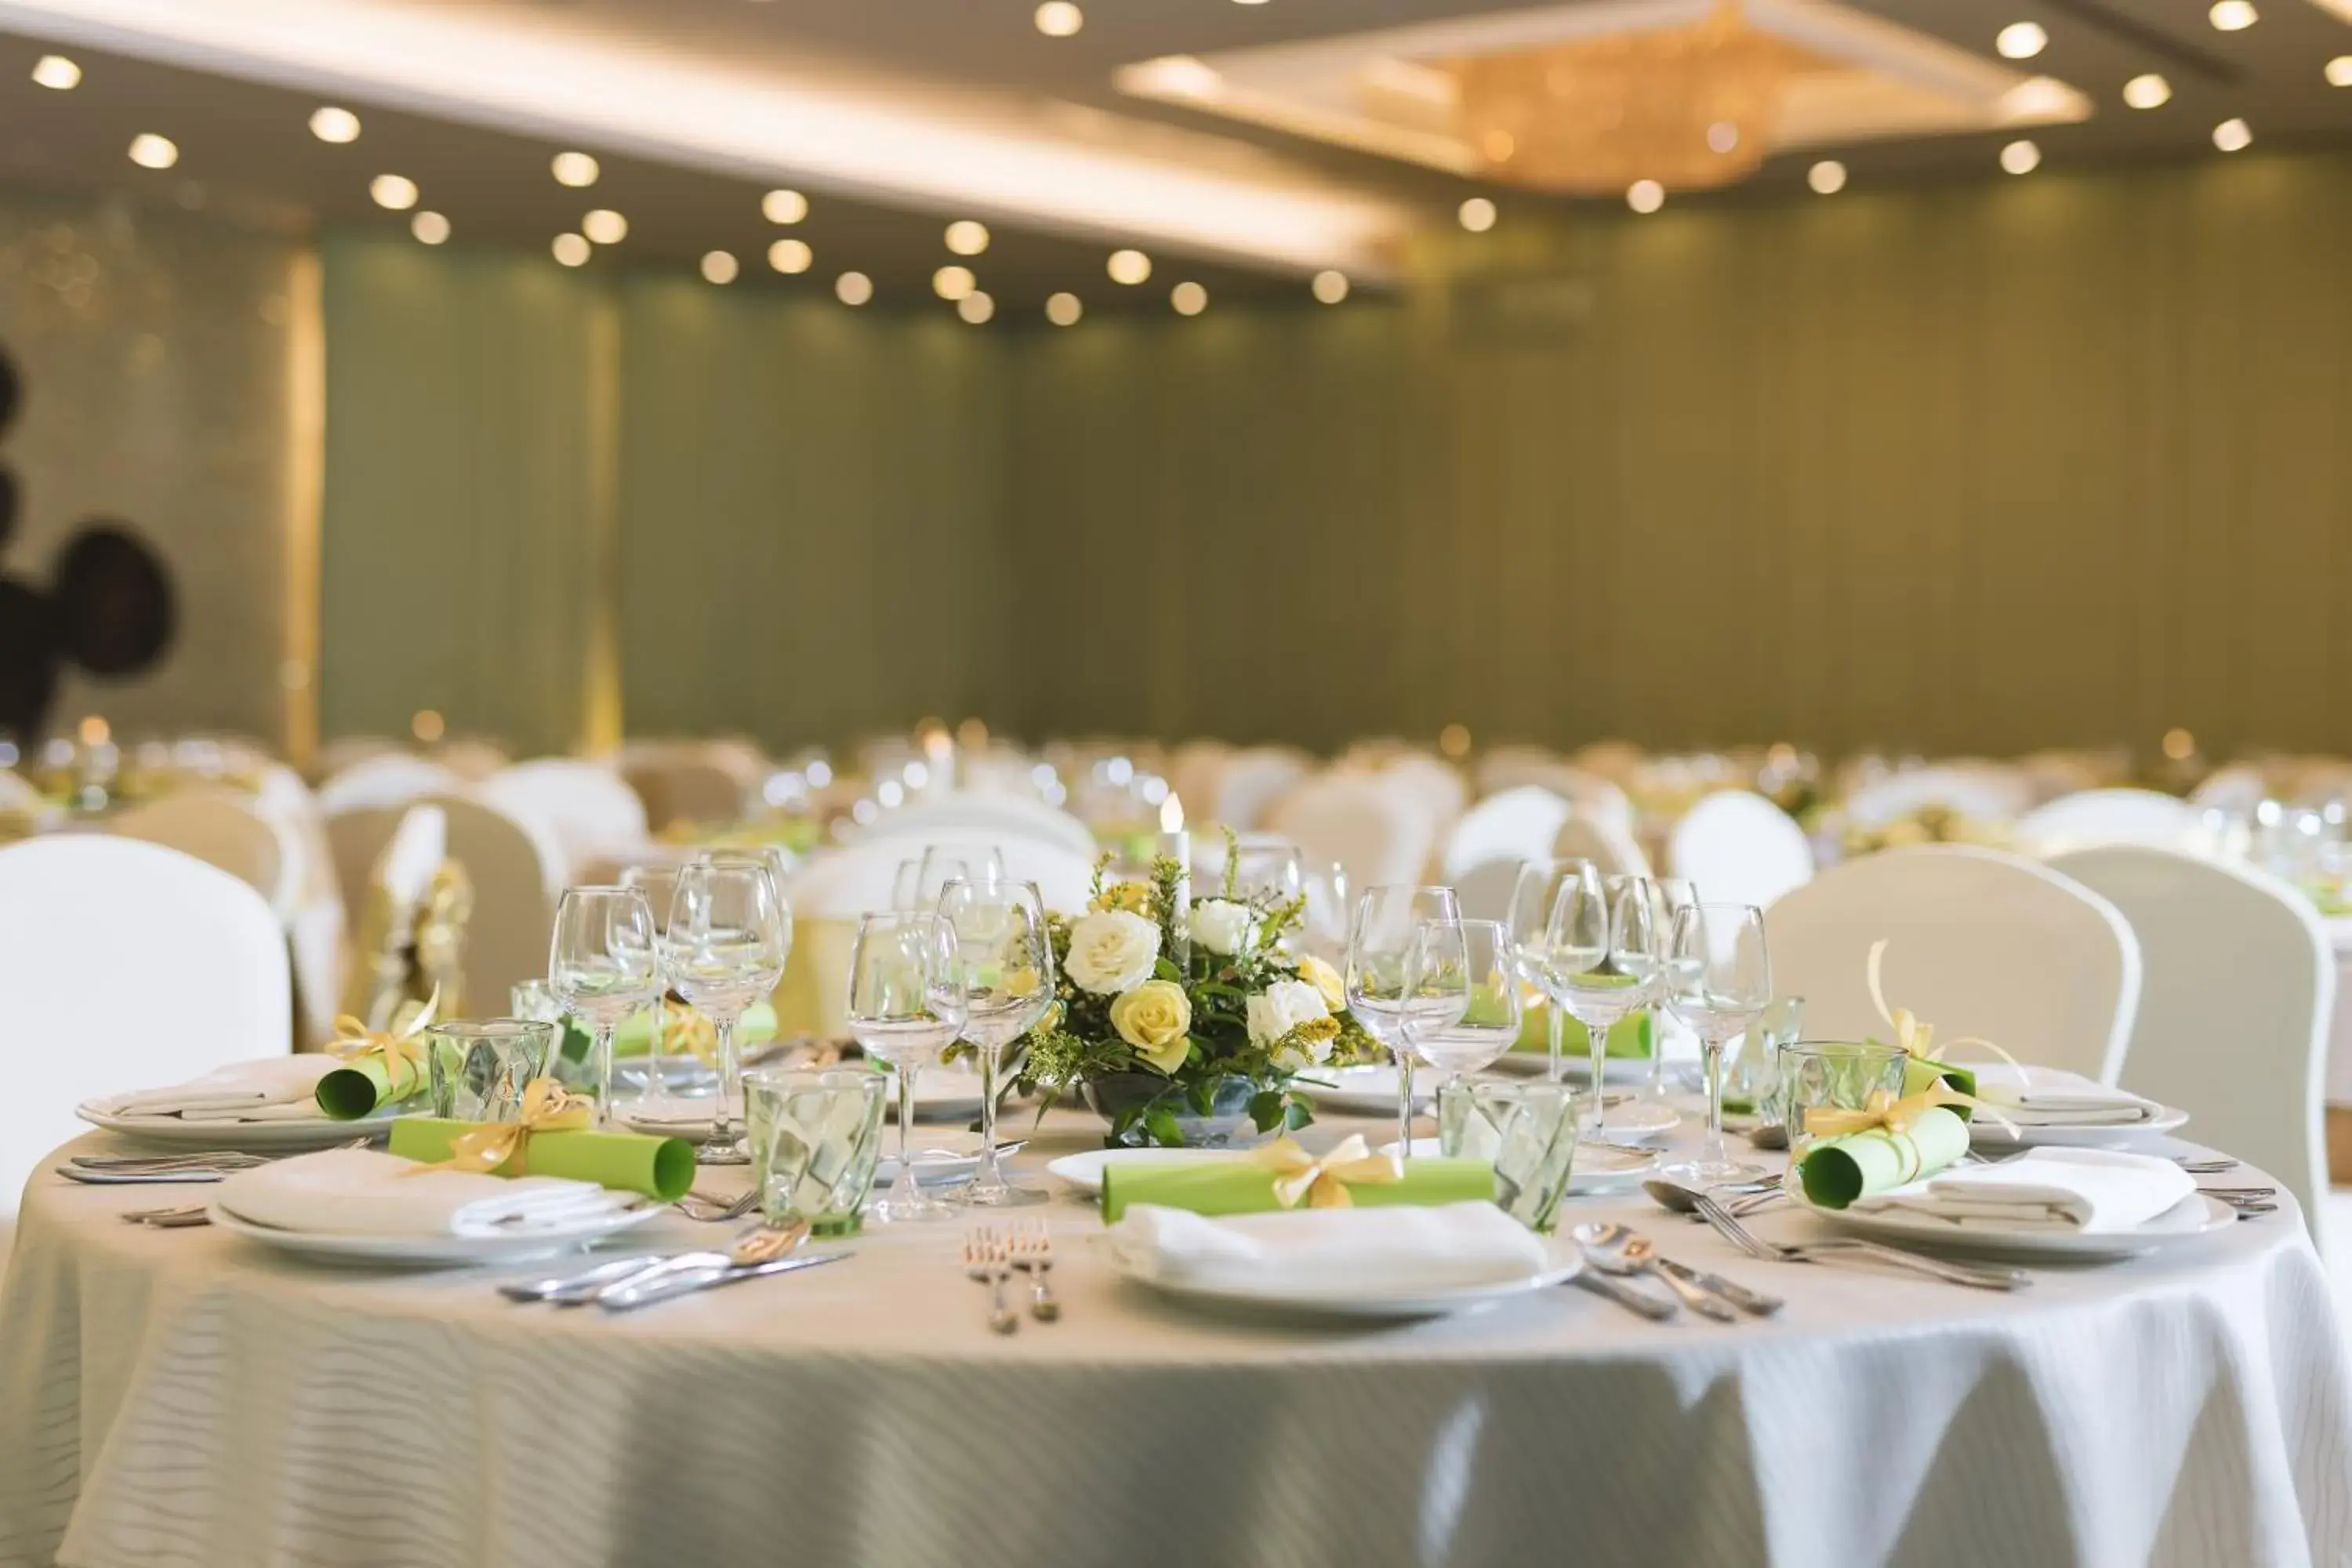 Banquet/Function facilities, Banquet Facilities in Best Western Green Hill Hotel